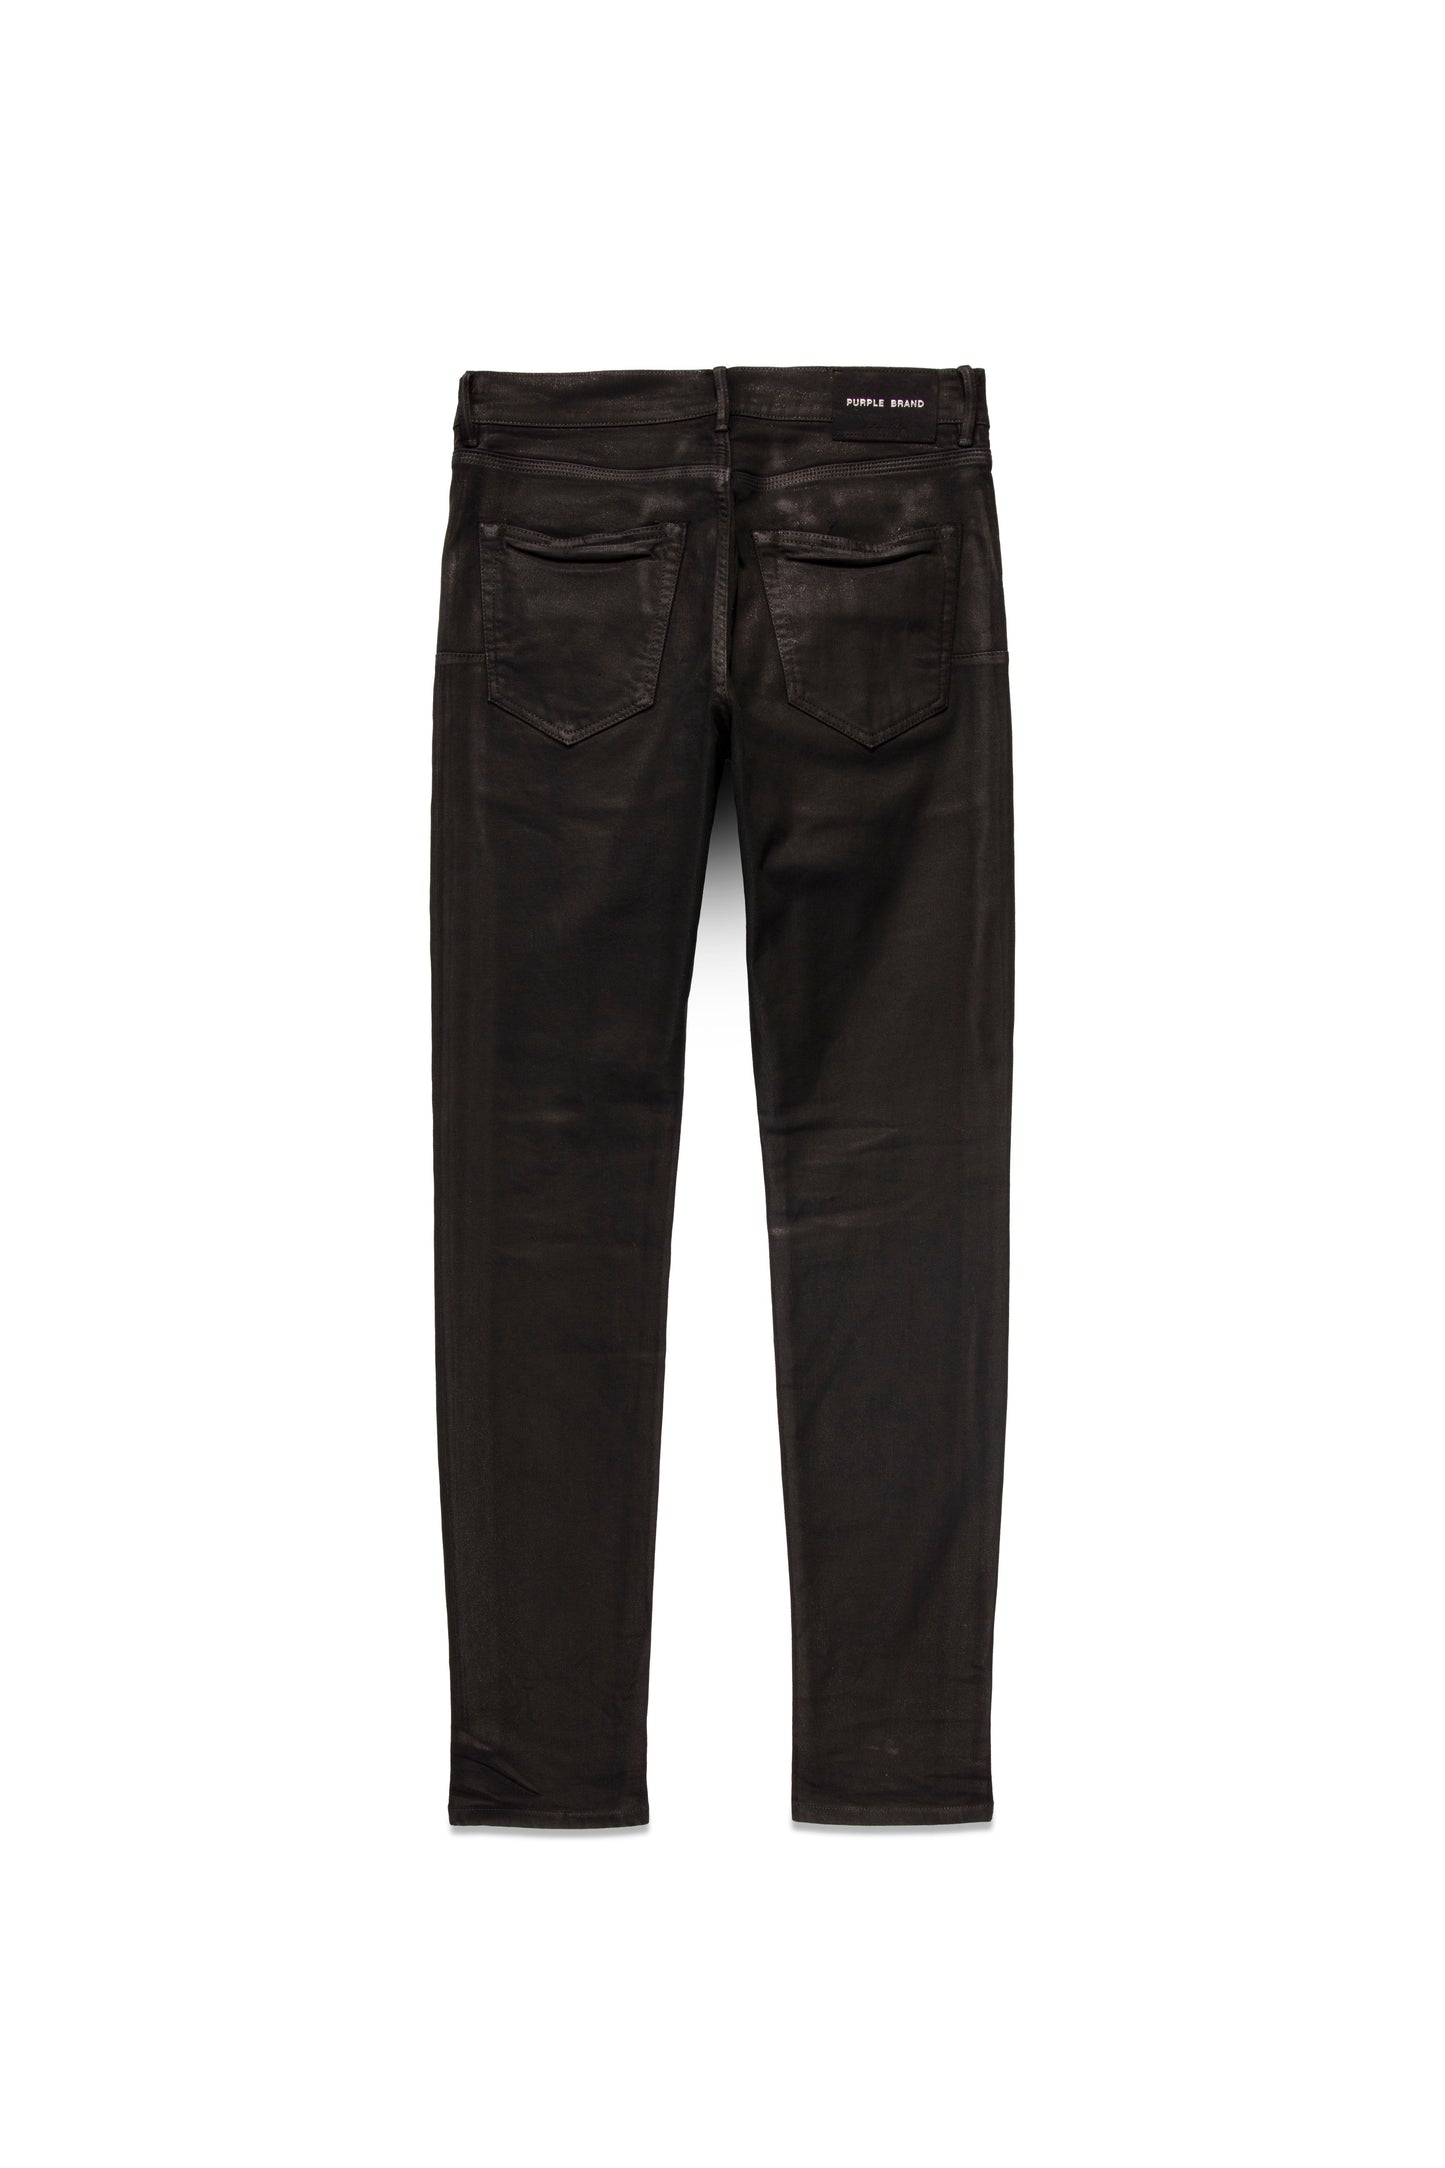 Shop Purple Brand P001 Low-Rise Skinny Waxed Jeans